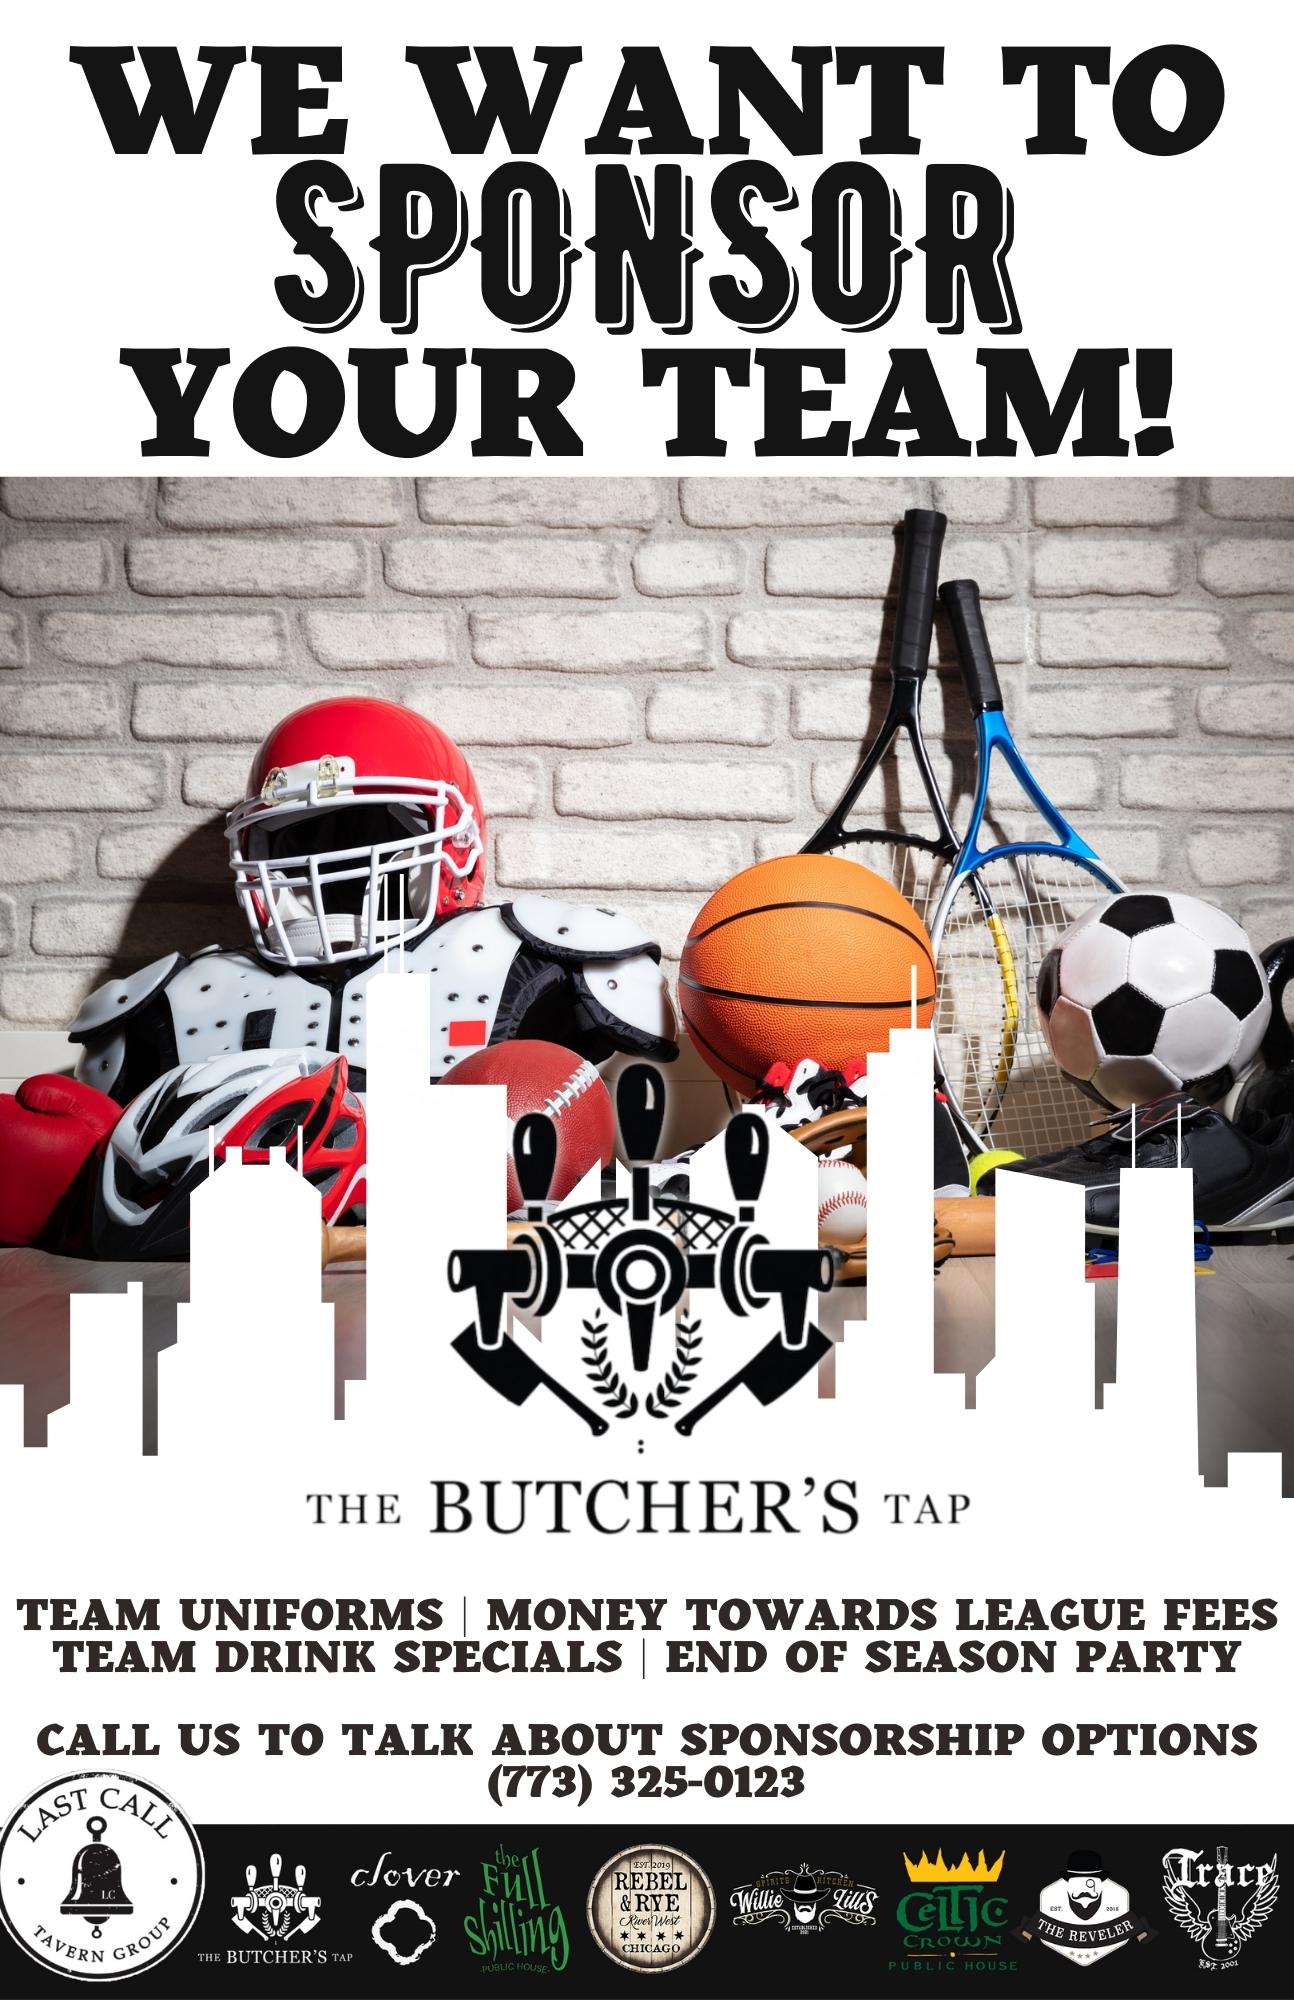 We Want To Sponsor Your Team!